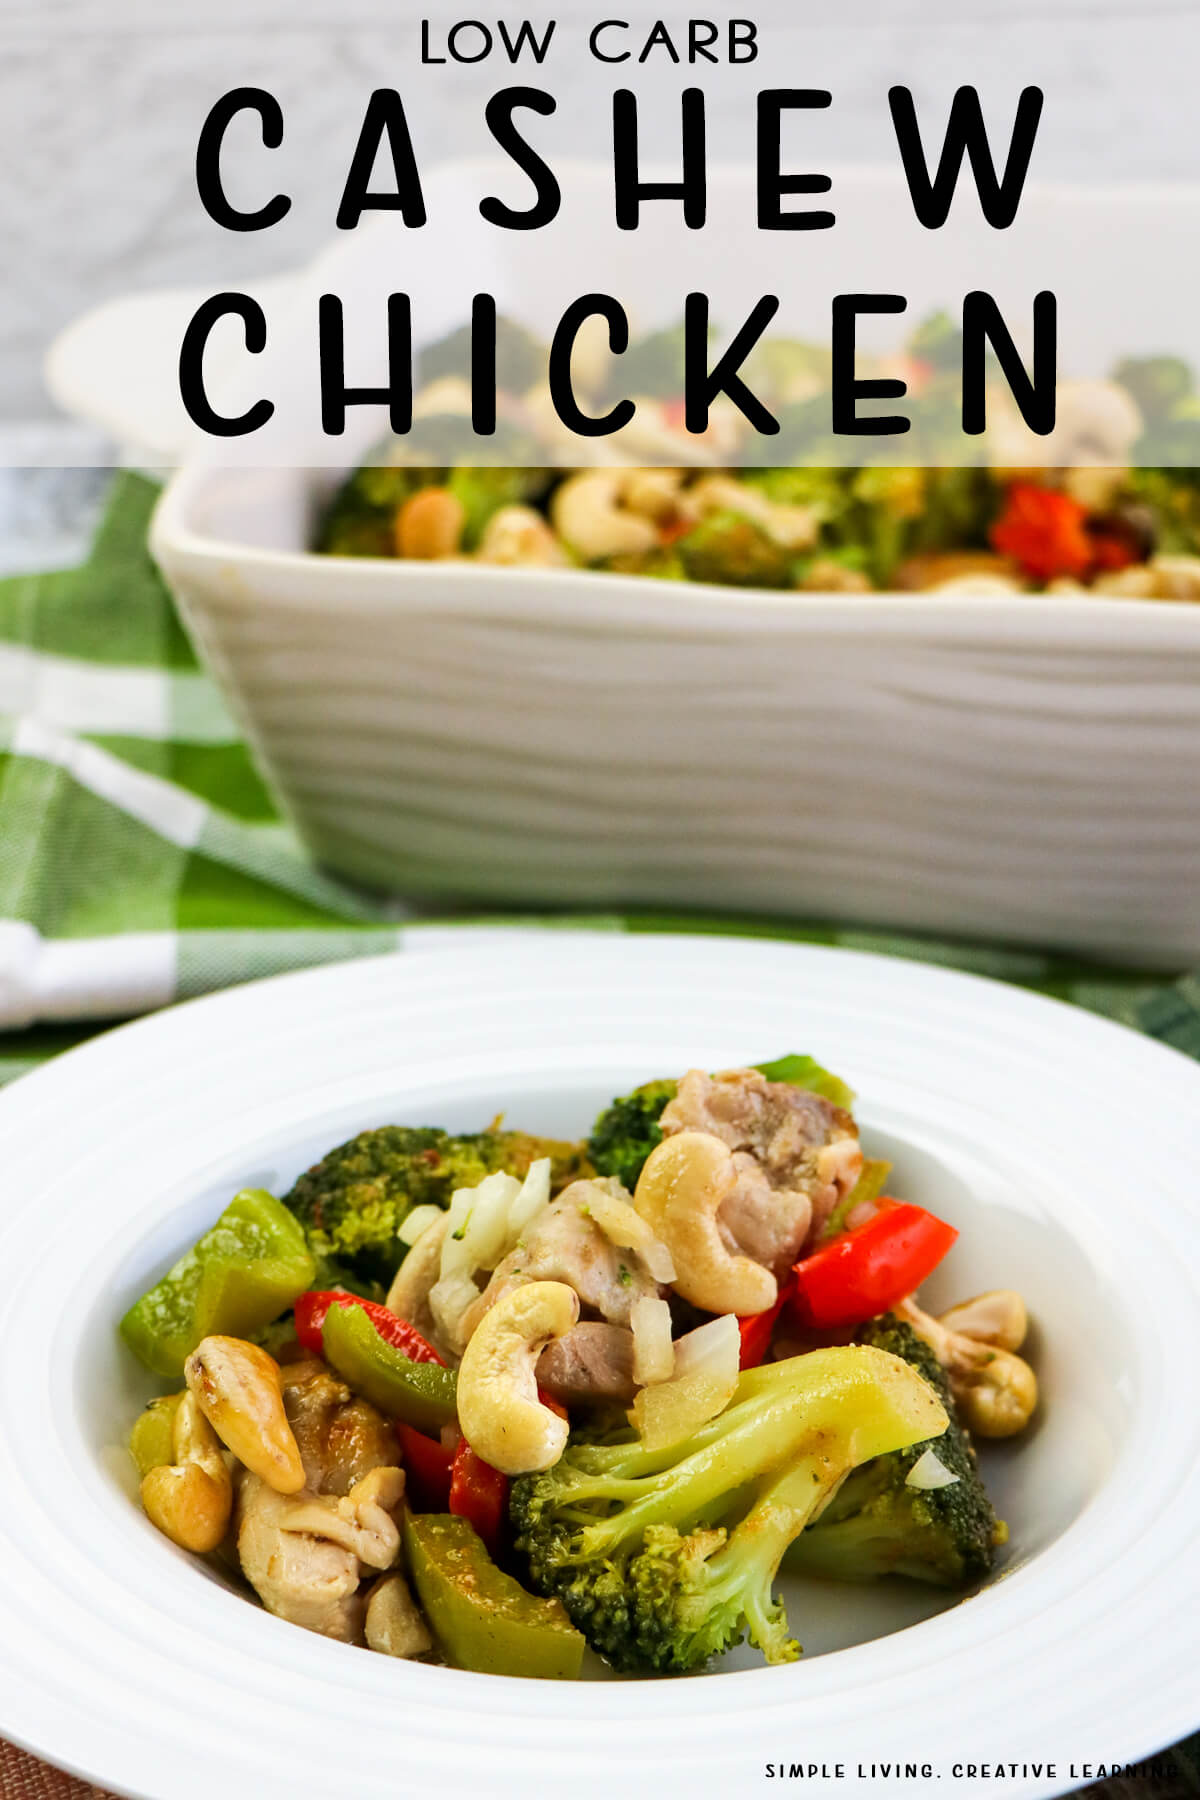 Low Carb Cashew Chicken